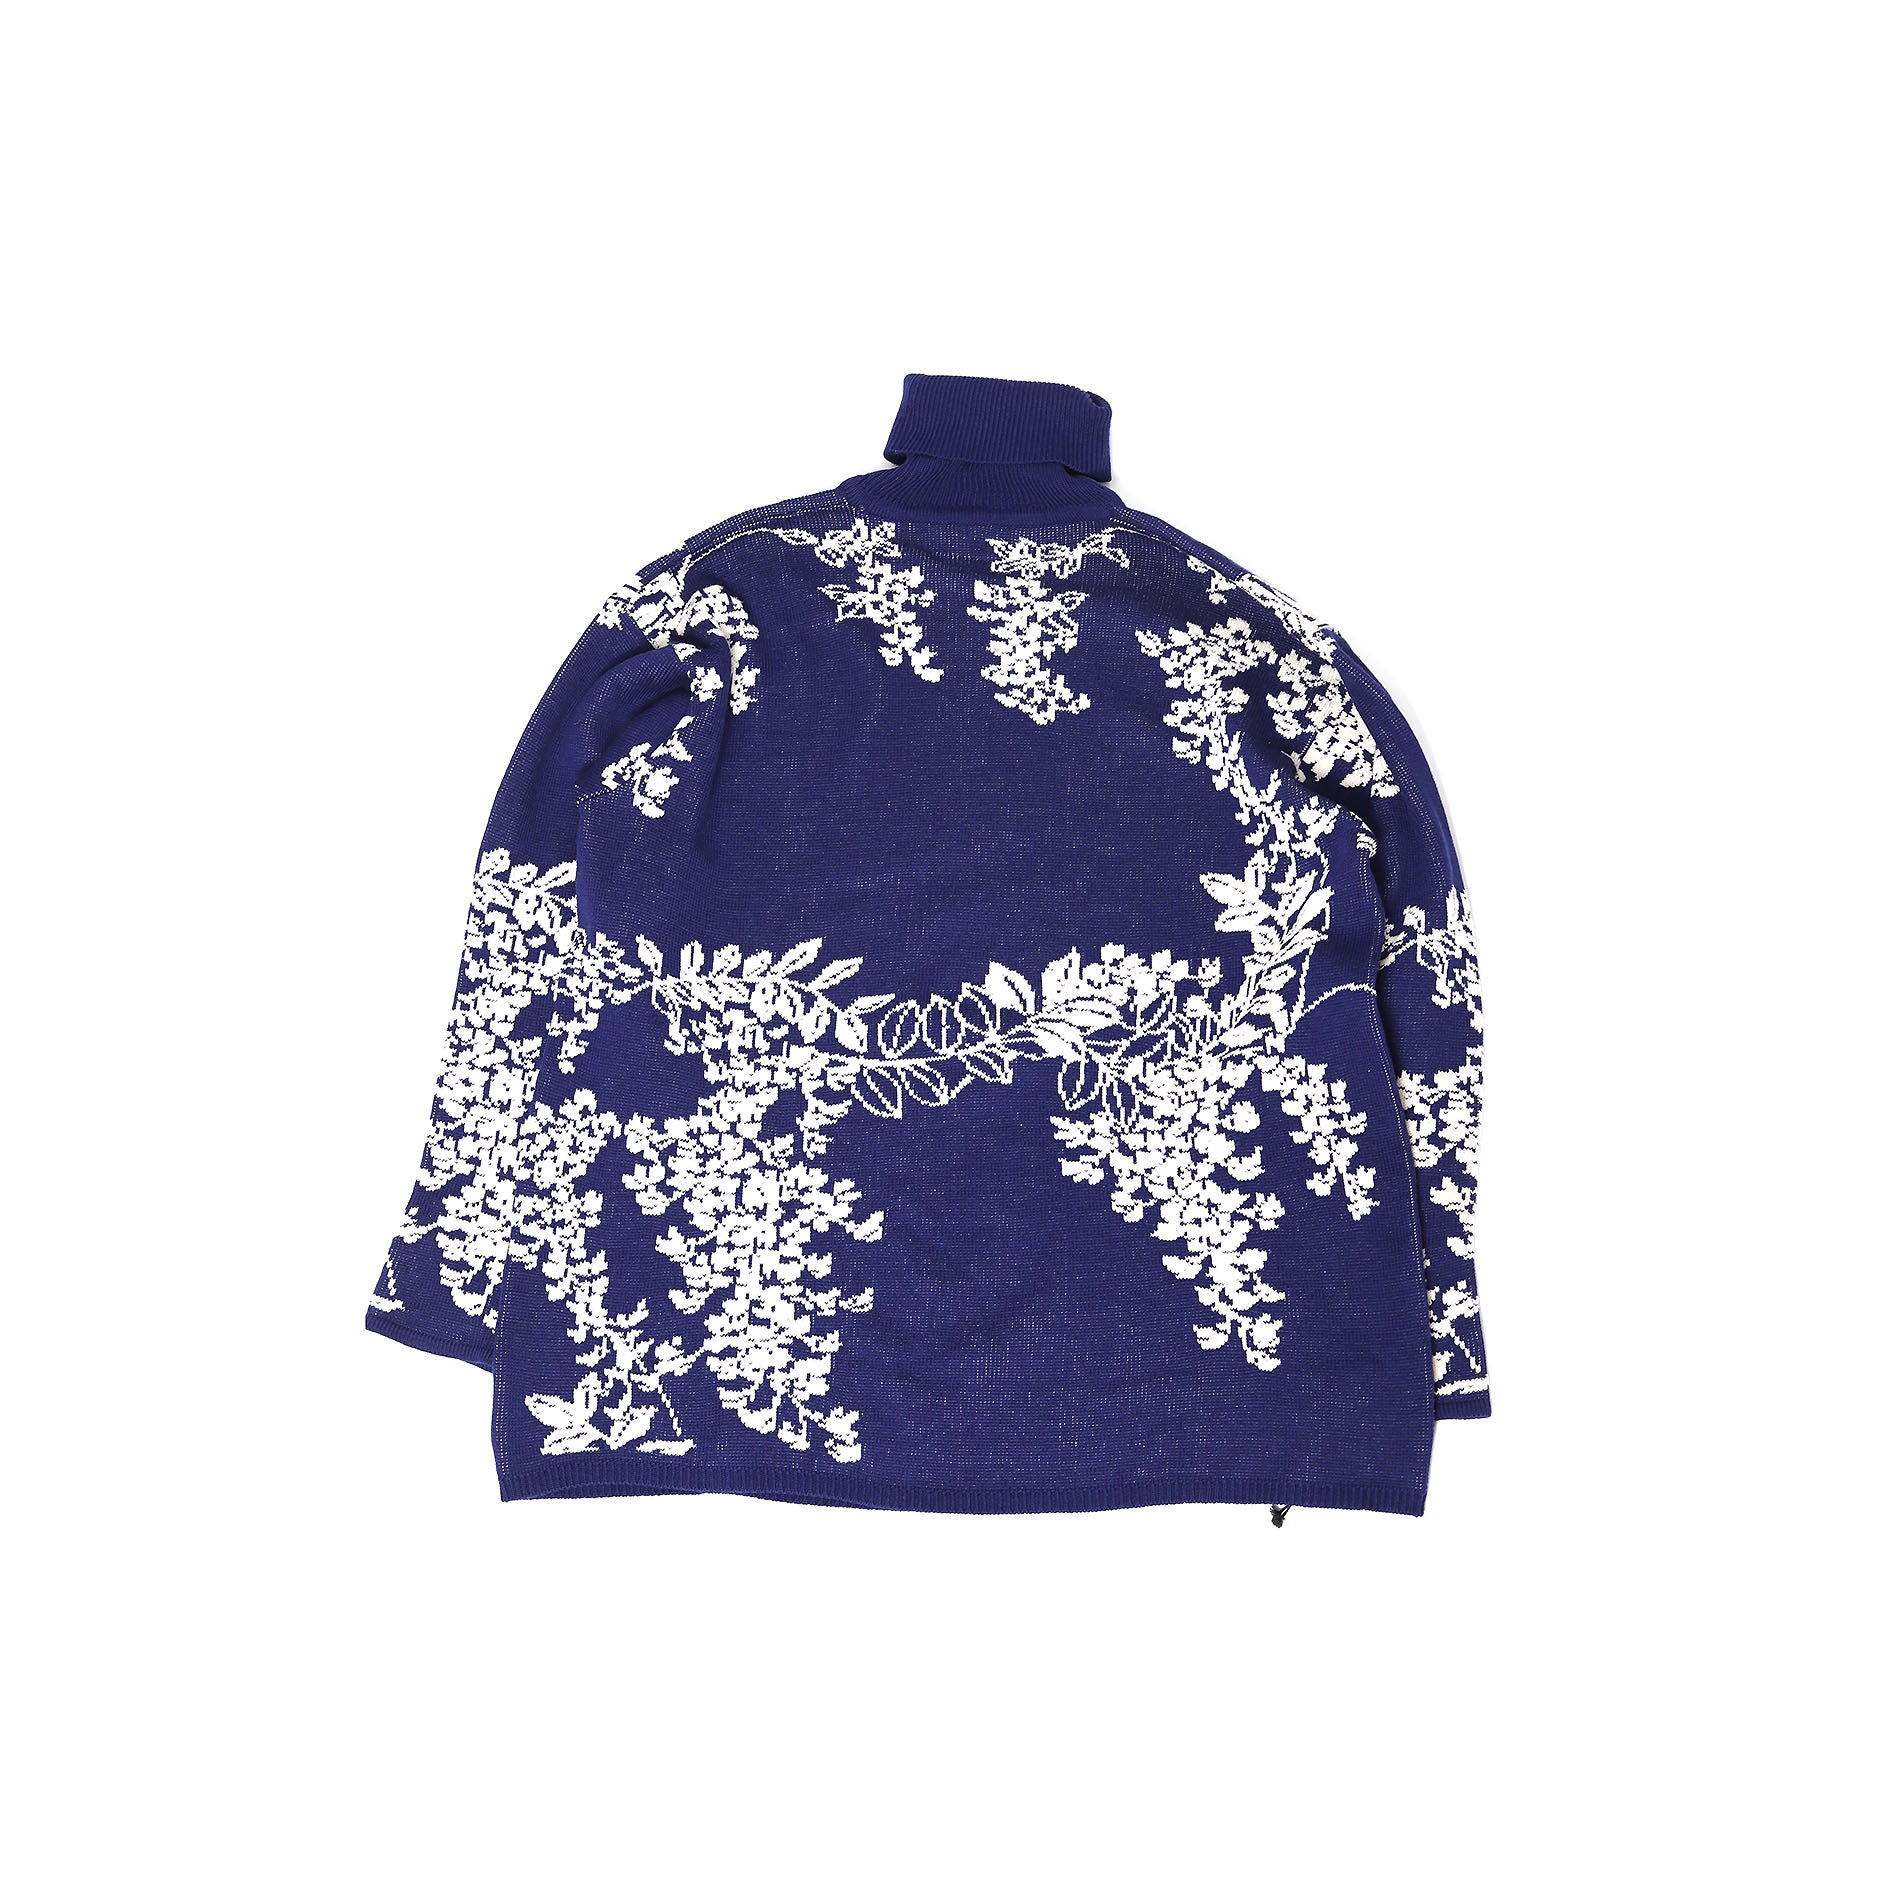 Yohji Yamamoto Pour Homme 80s Floral Blue Oversized Roll Neck Knit Sweater